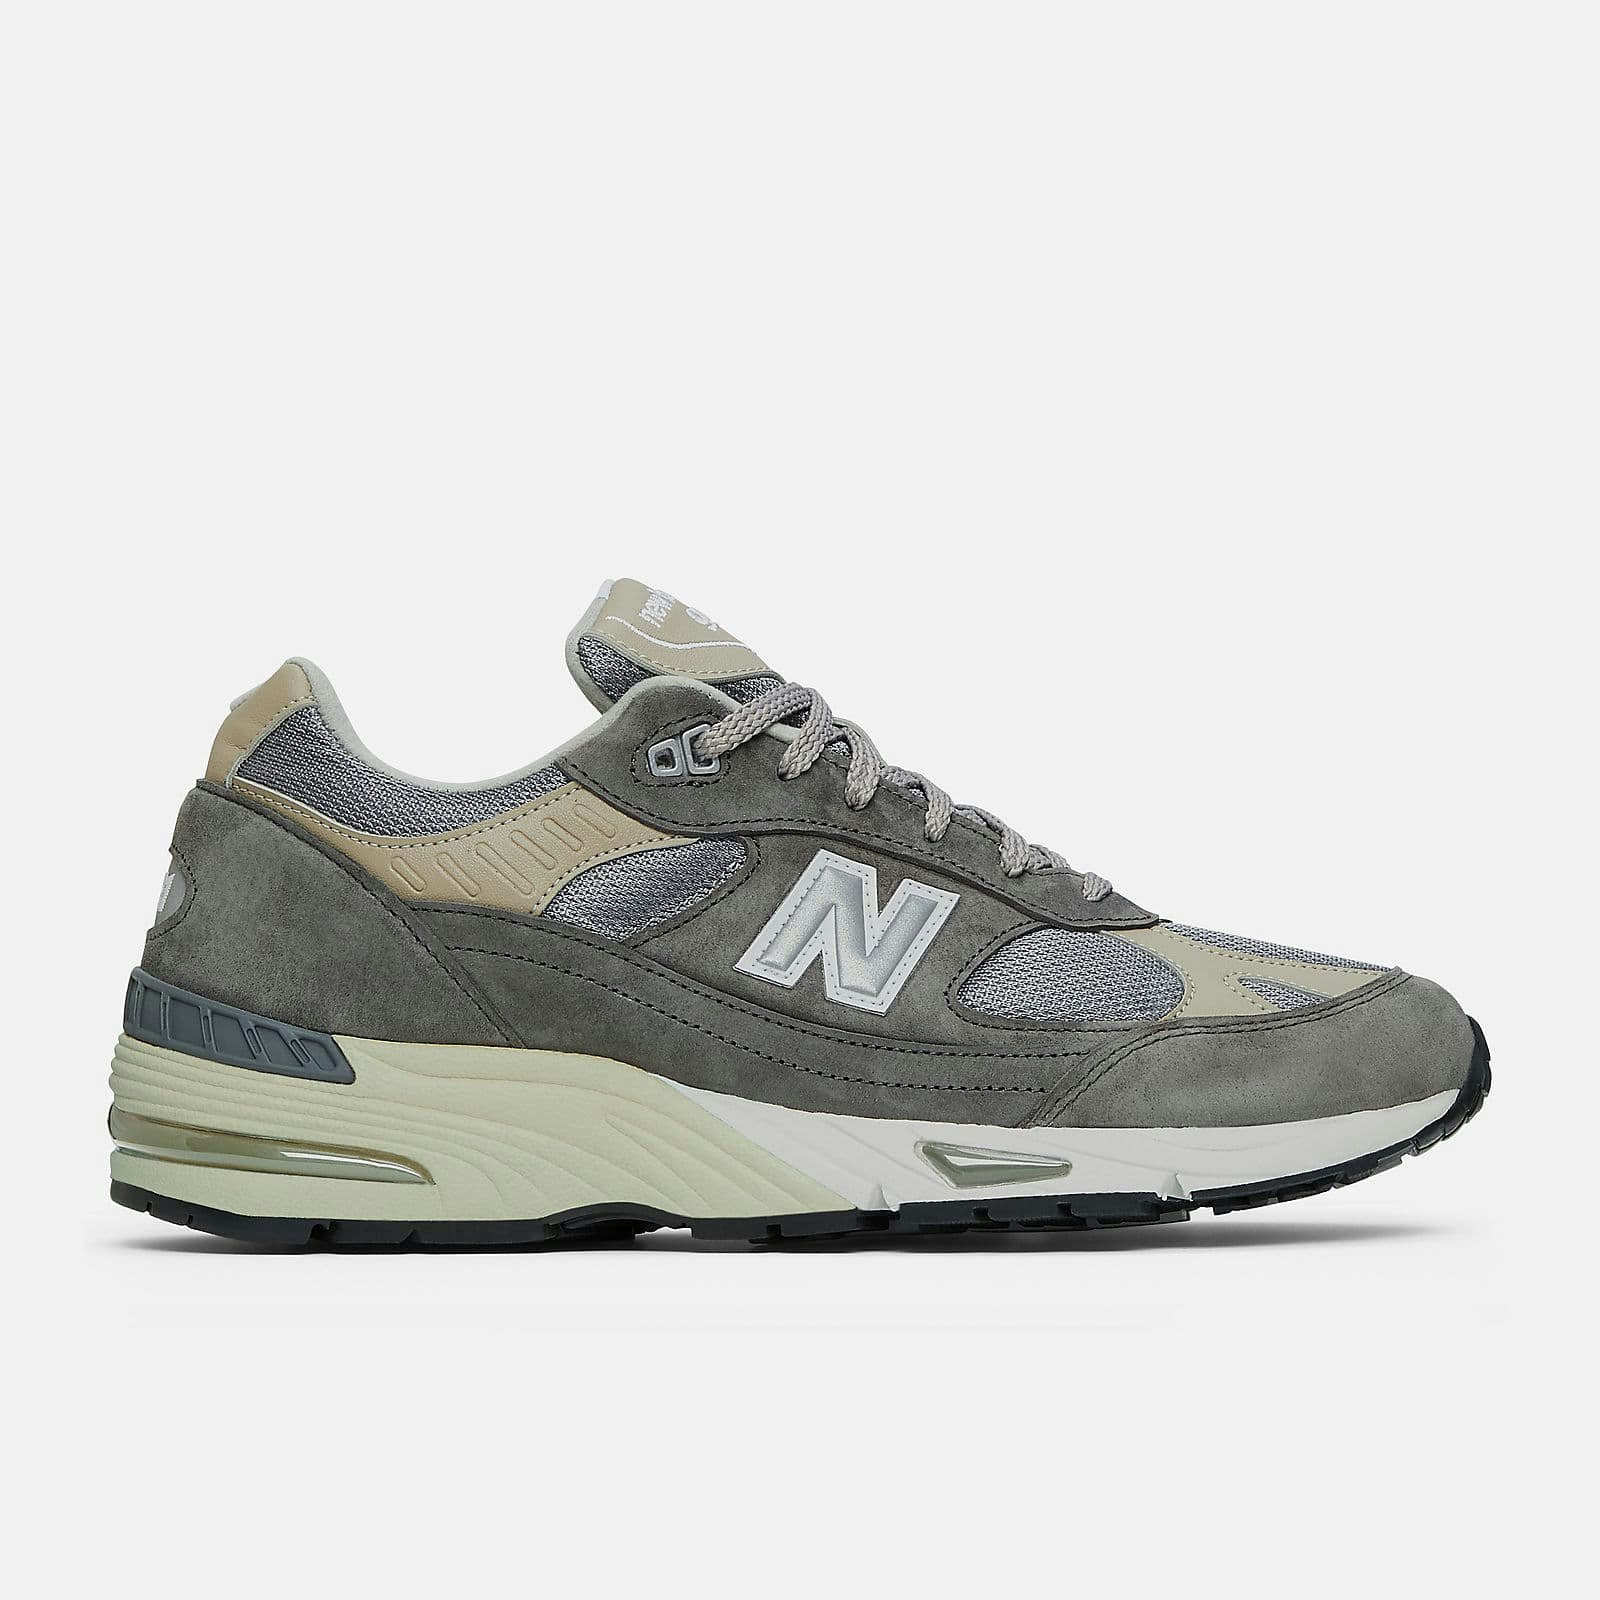 New Balance 991 "Made in UK" (Suede Grey)